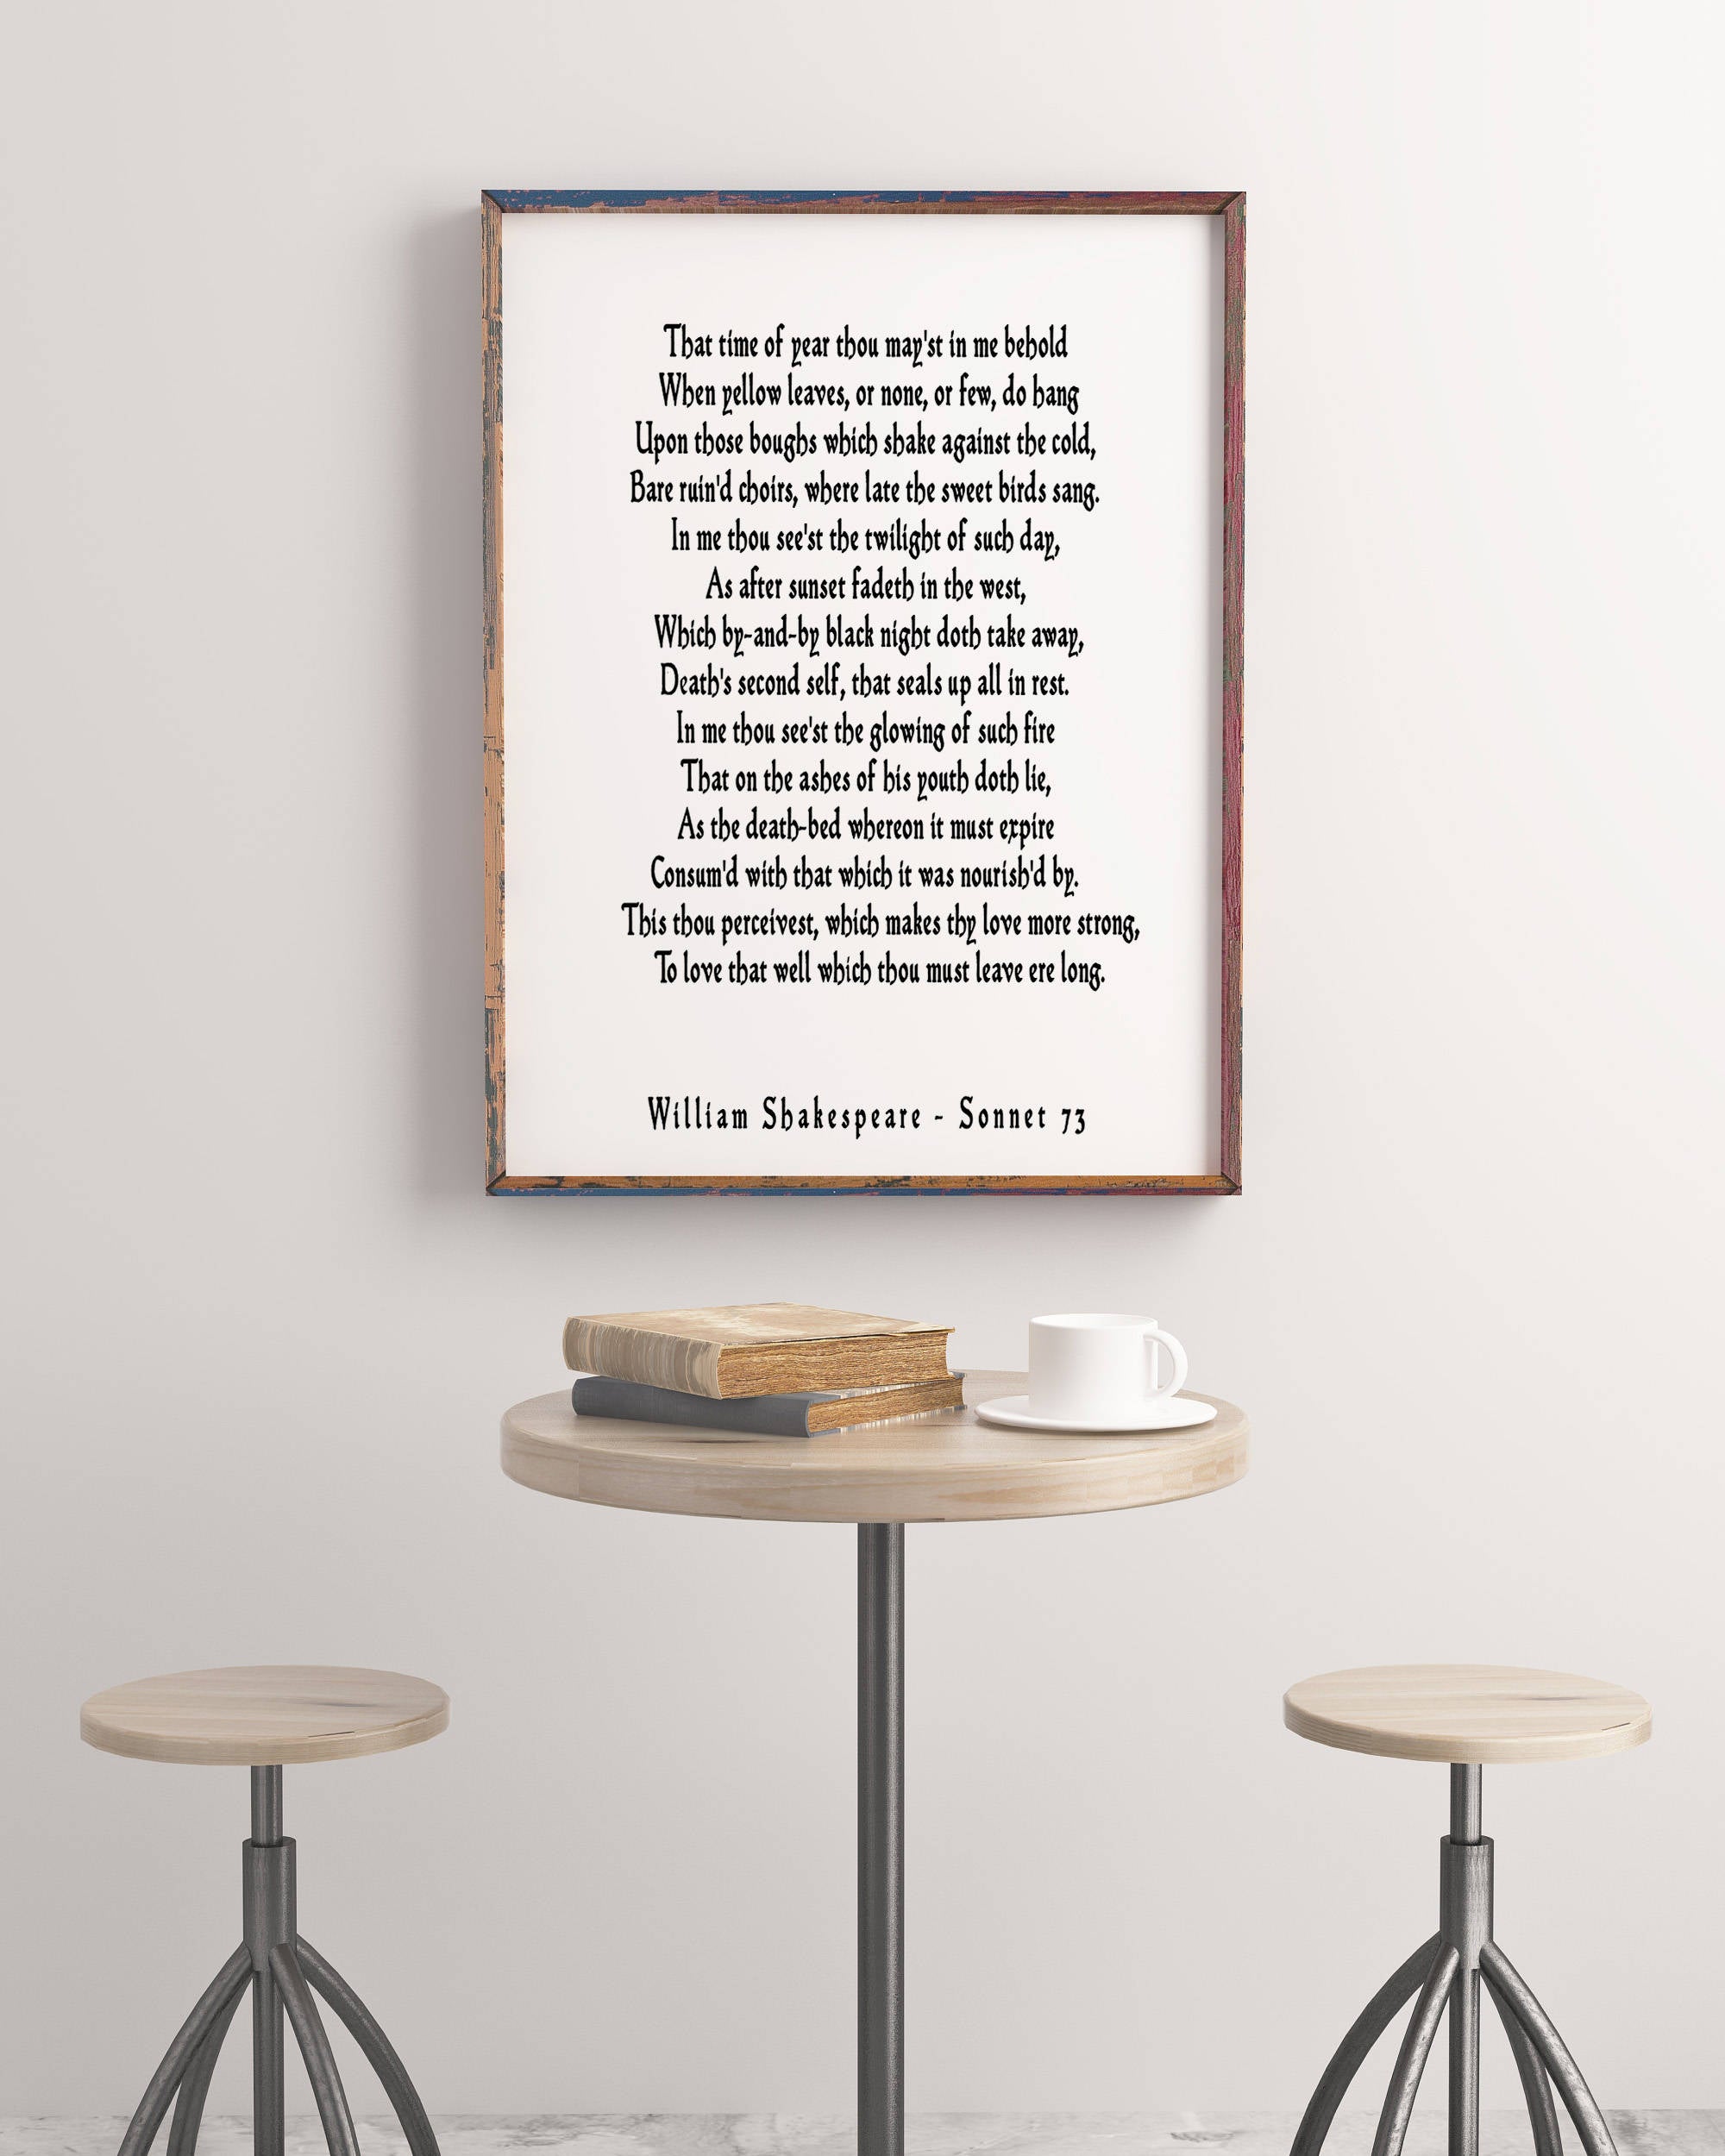 Sonnet 73 Shakespeare Love Poem, That Time Of Year Thou Mayst In Me Behold Shakespeare Wall Art for Bedroom Decor